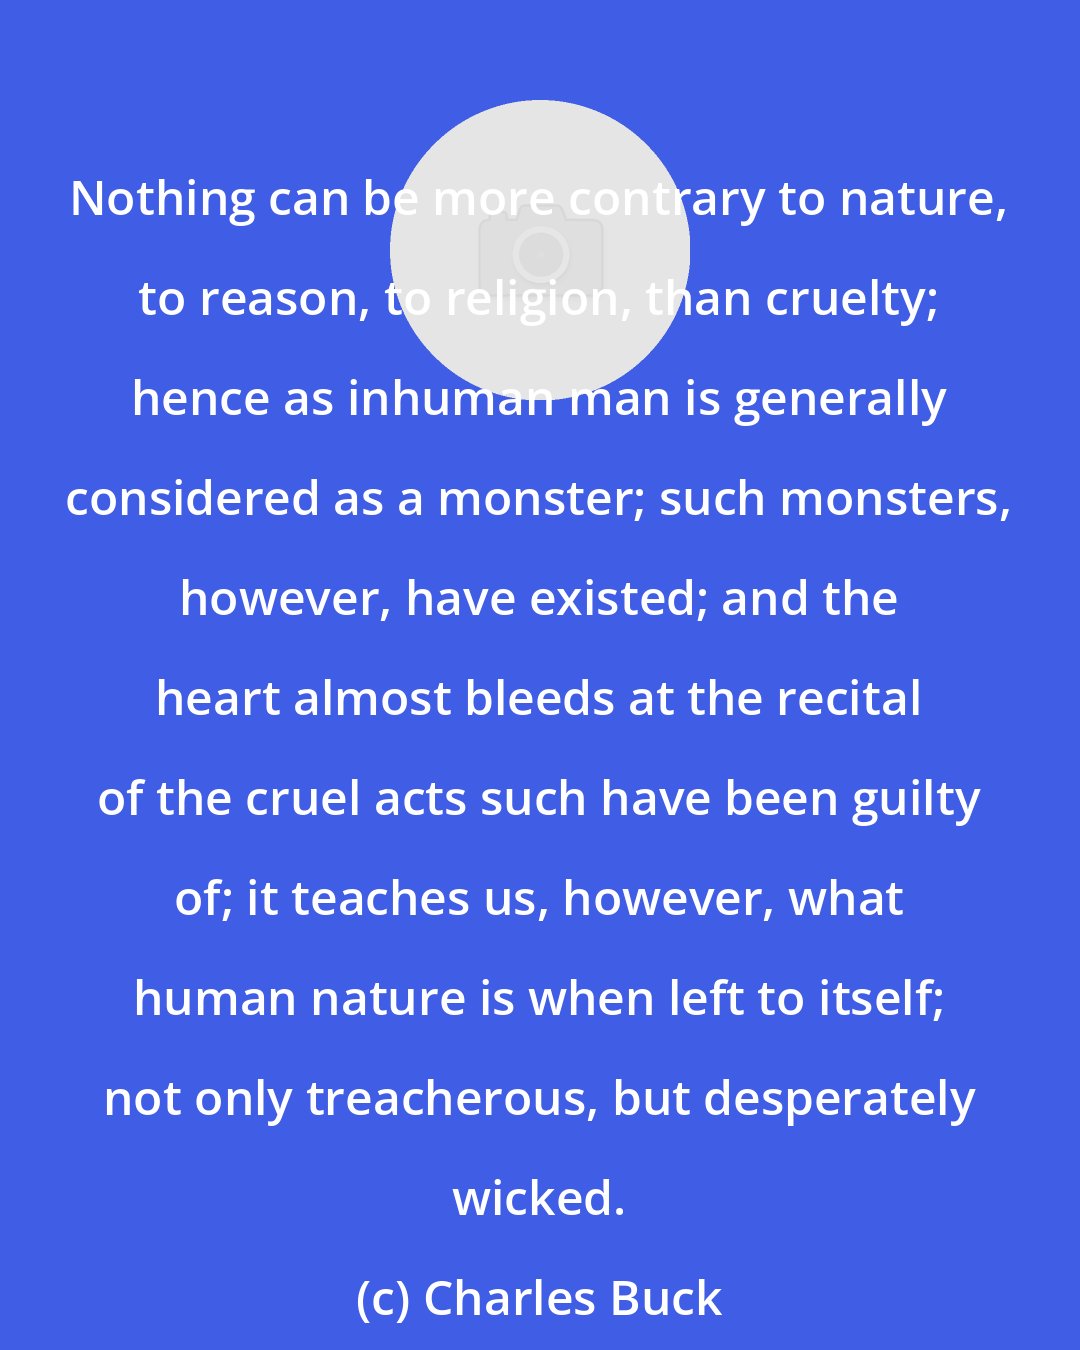 Charles Buck: Nothing can be more contrary to nature, to reason, to religion, than cruelty; hence as inhuman man is generally considered as a monster; such monsters, however, have existed; and the heart almost bleeds at the recital of the cruel acts such have been guilty of; it teaches us, however, what human nature is when left to itself; not only treacherous, but desperately wicked.